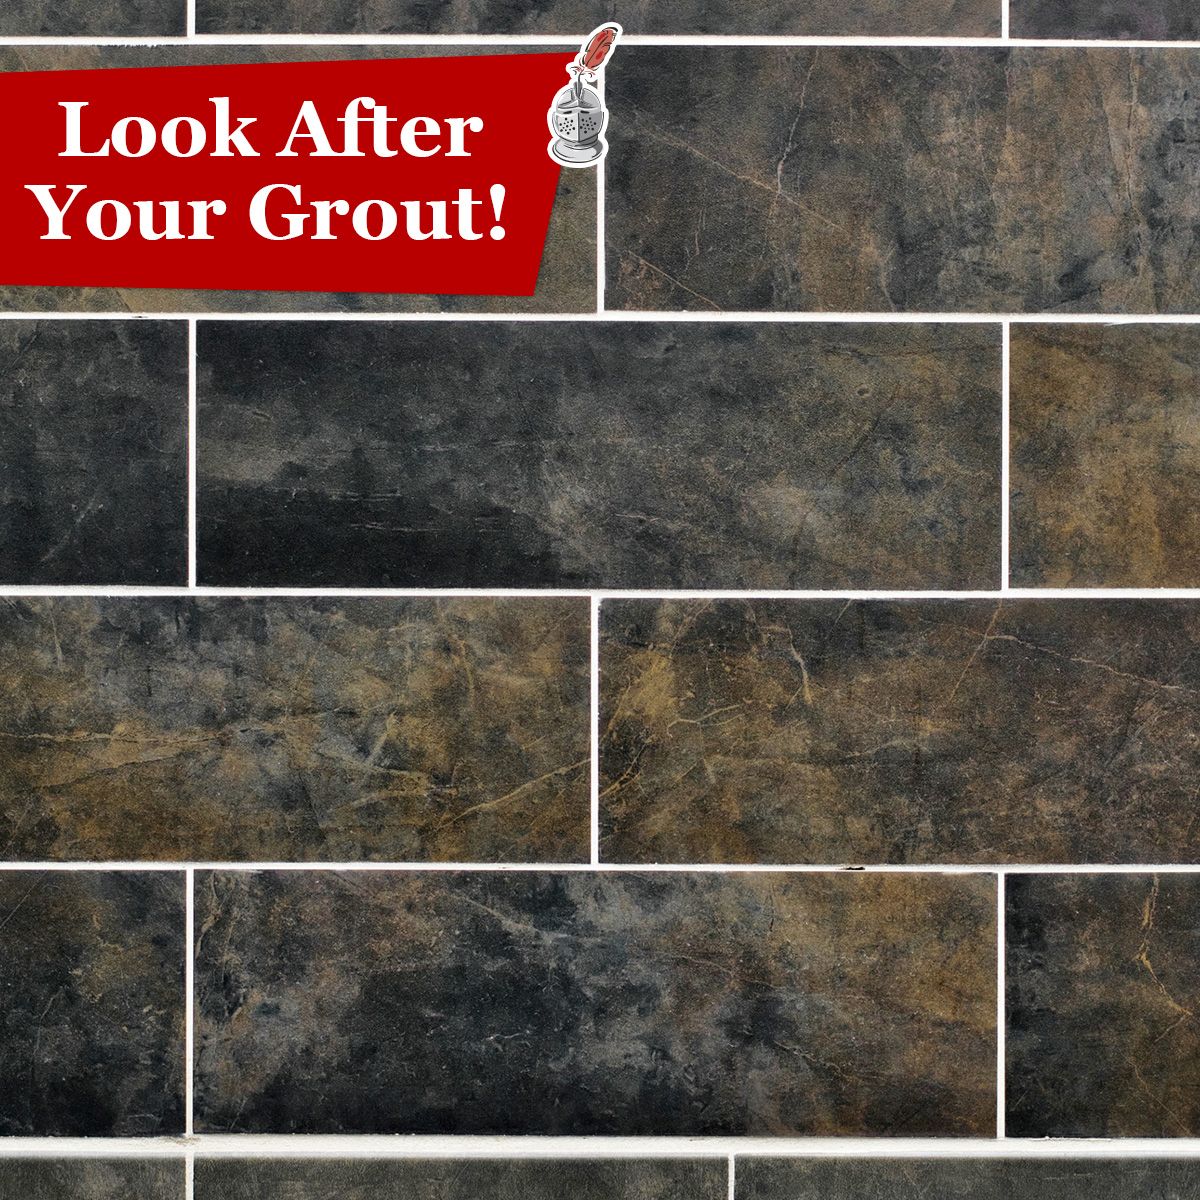 Look After Your Grout!